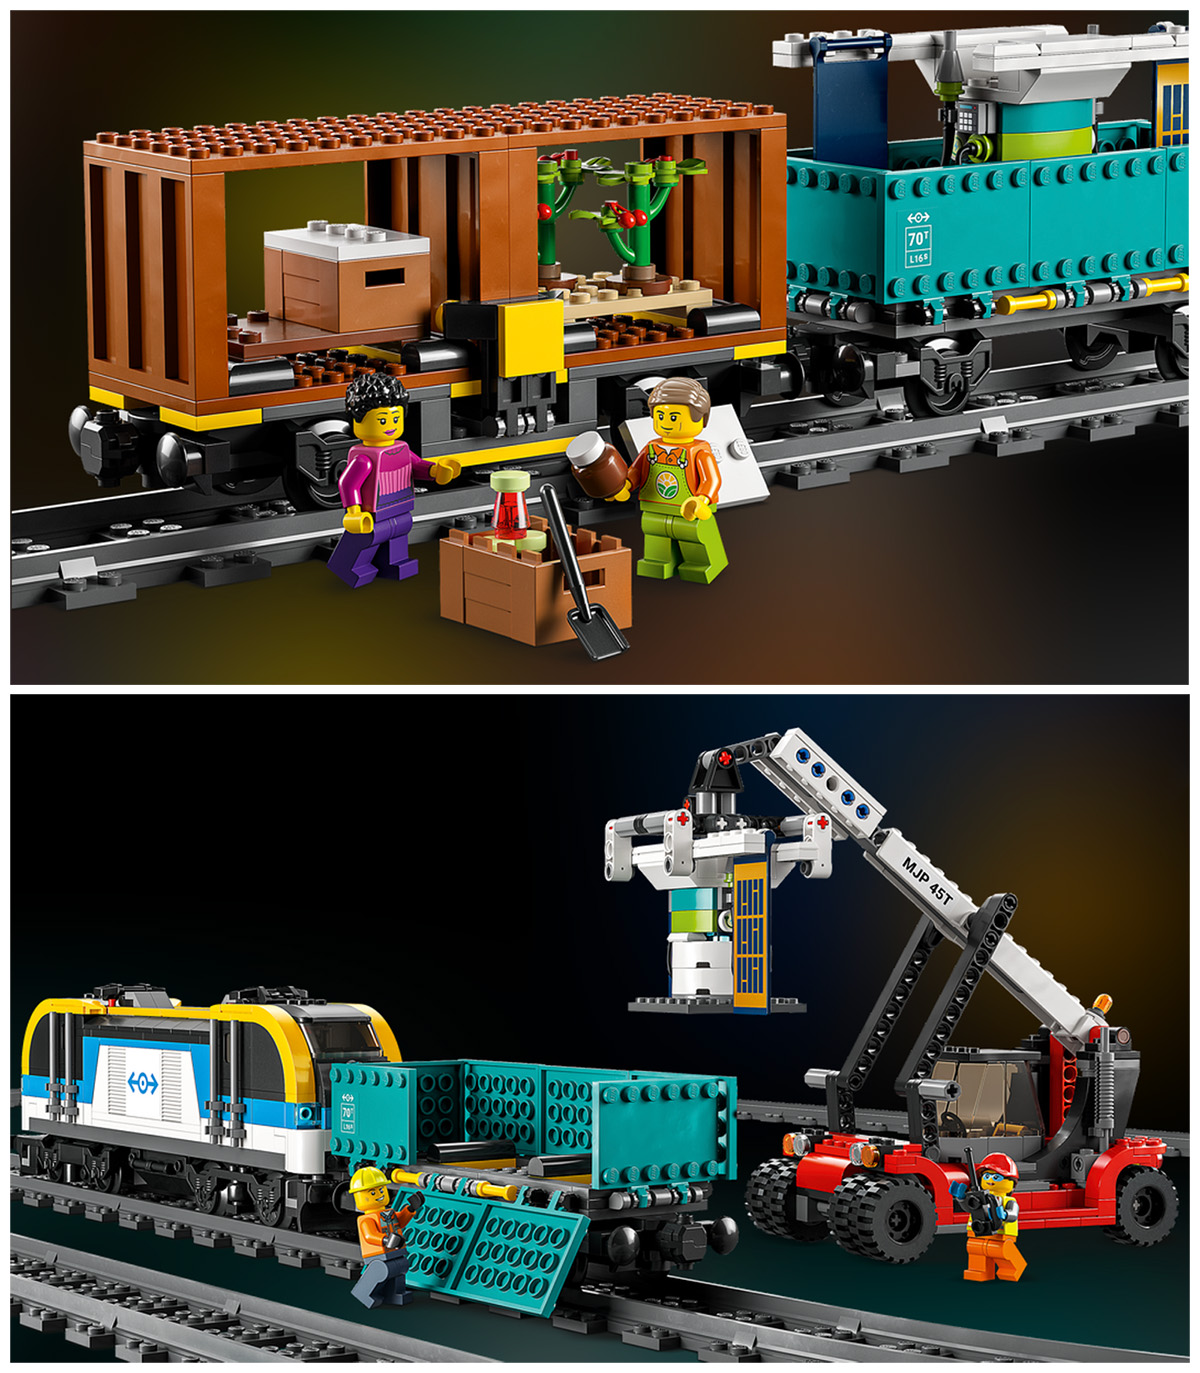 Better Images of LEGO City Freight Train (60336) - The Brick Fan